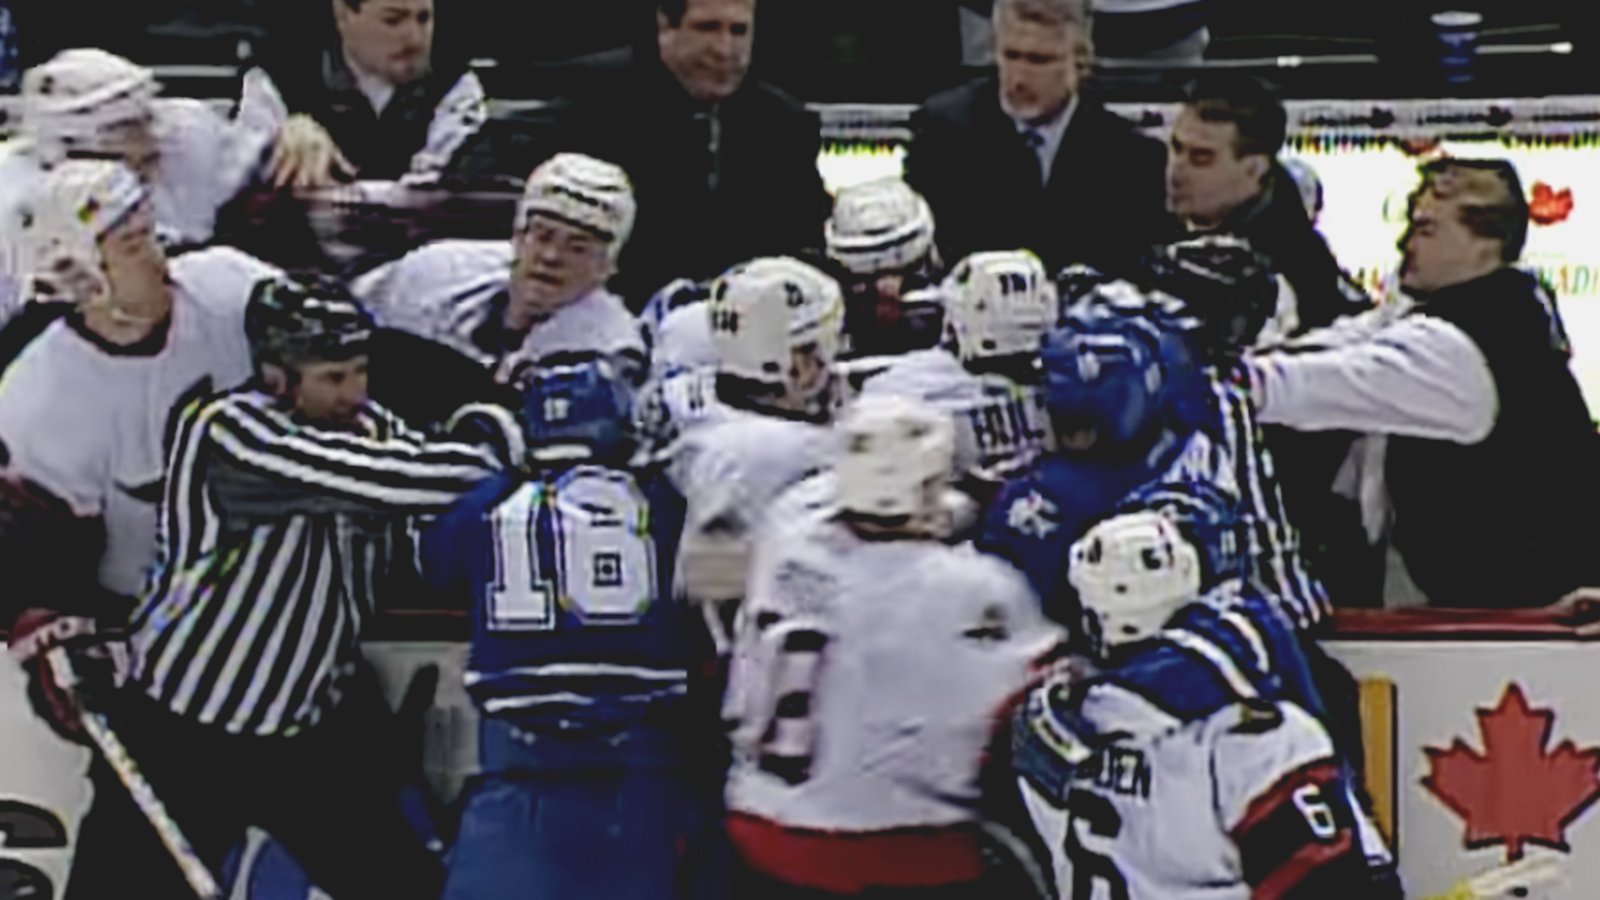 WATCH: The Day Darcy Tucker Took on the Whole Senators Bench.